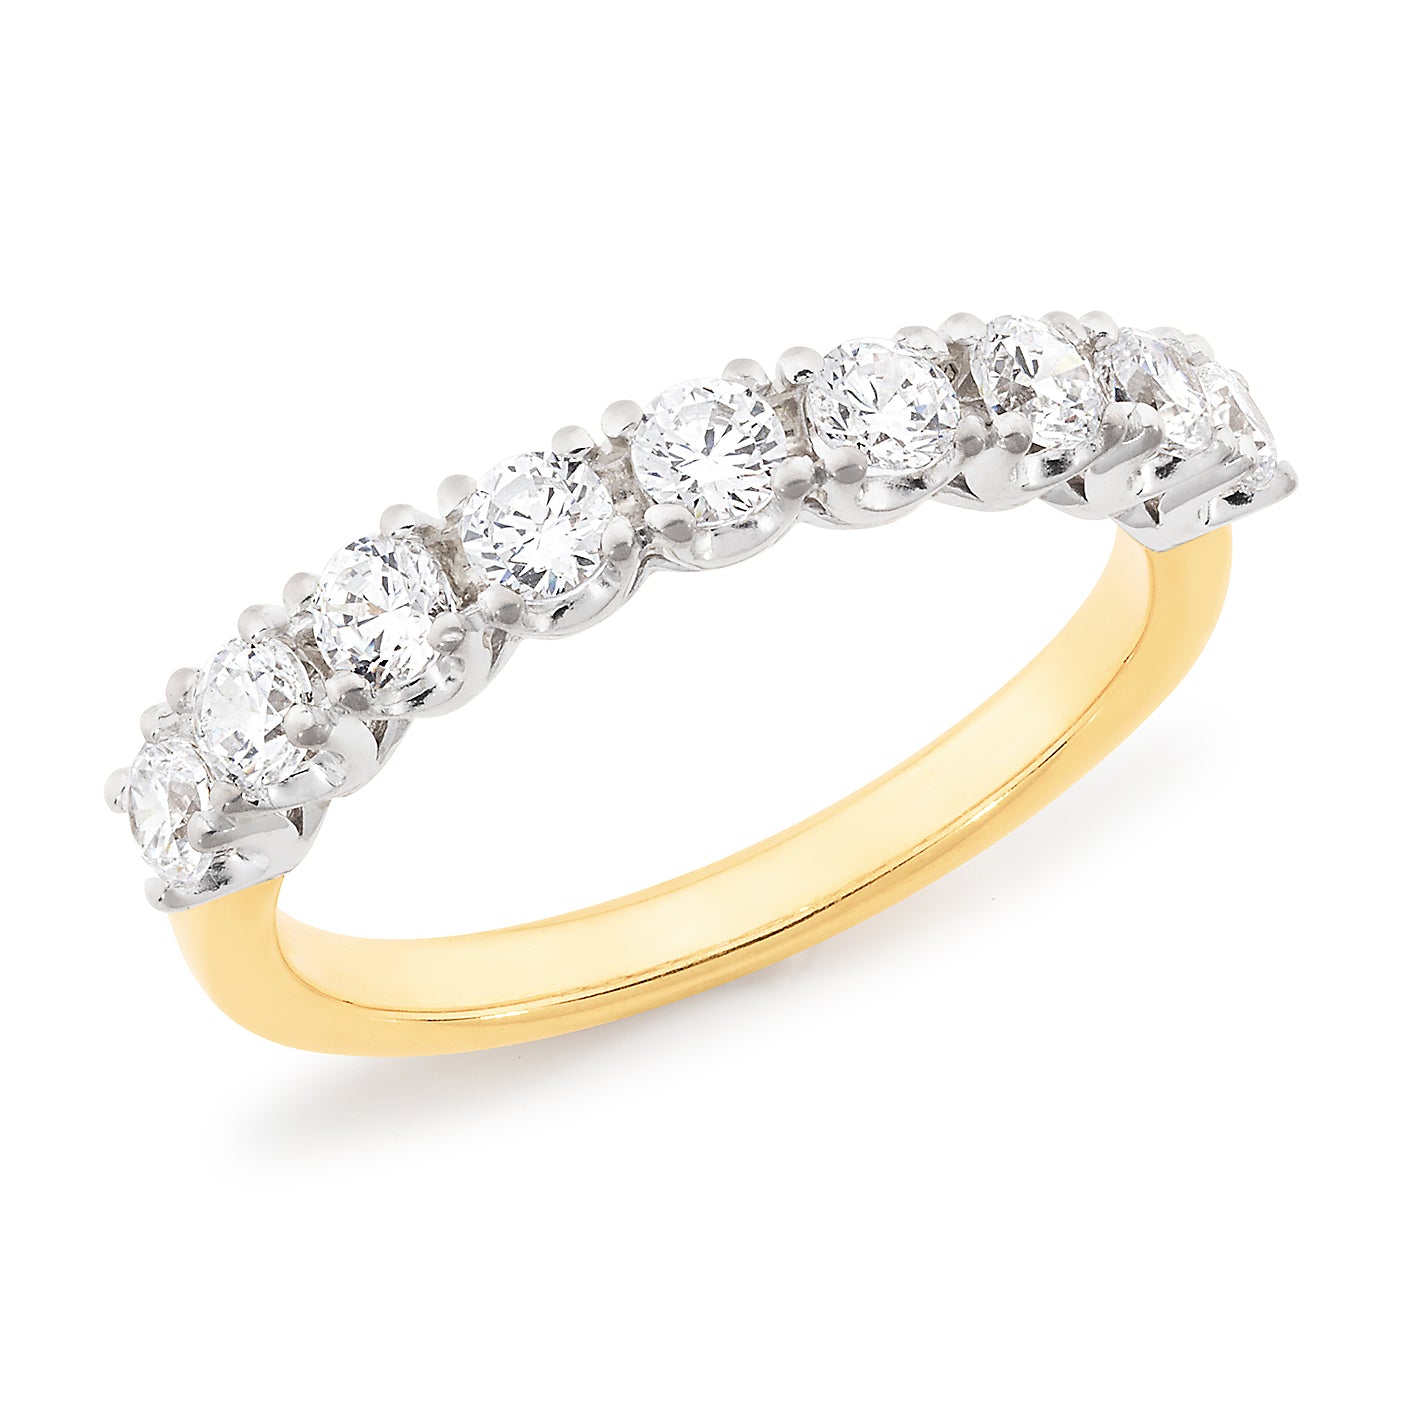 Diamond Claw Set Straight Anniversary Ring Set in 9 carat Yellow and White Gold